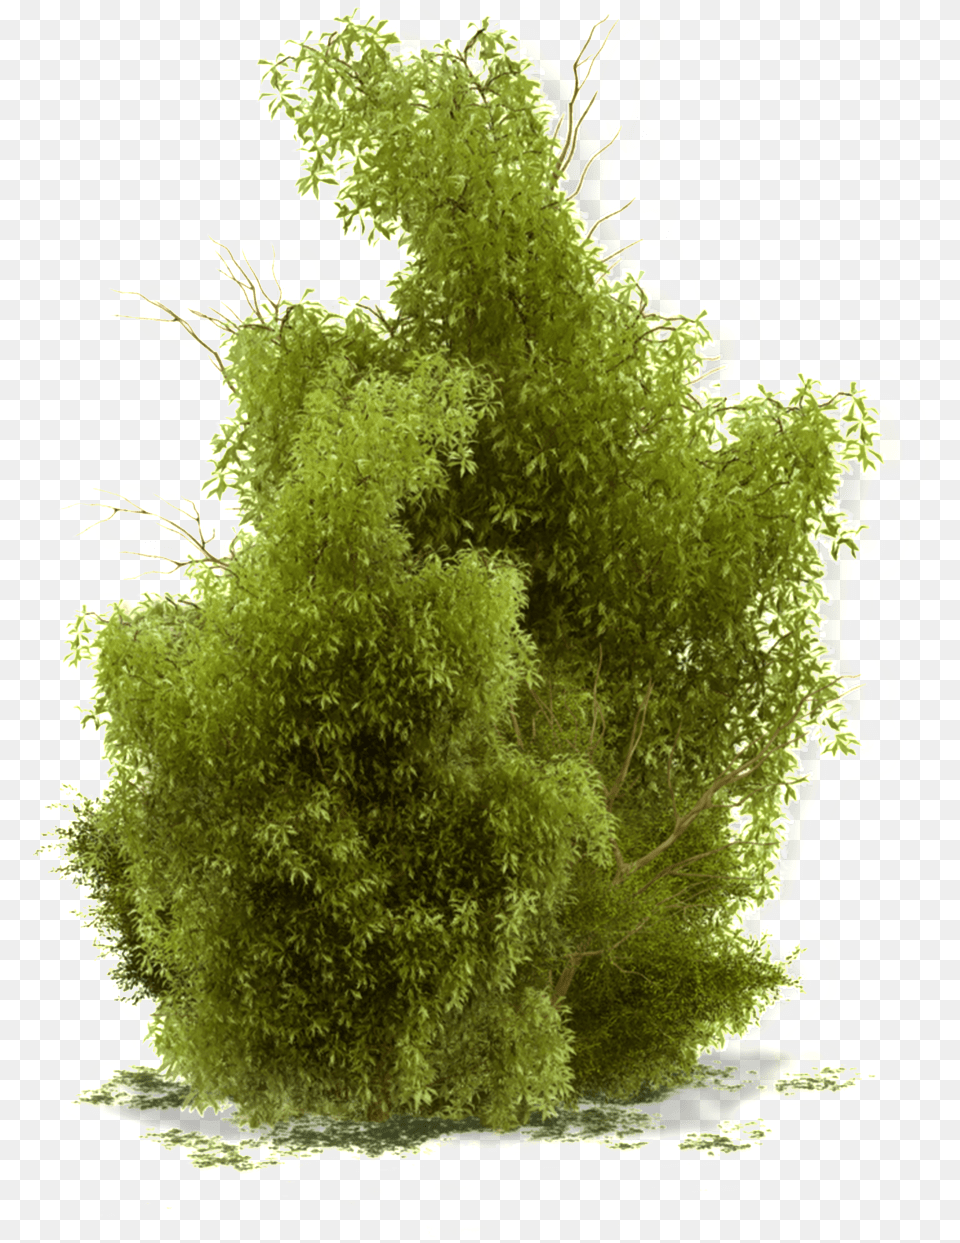 This Product Design Is Growing Tree About Tree Shrub, Green, Moss, Plant, Vegetation Png